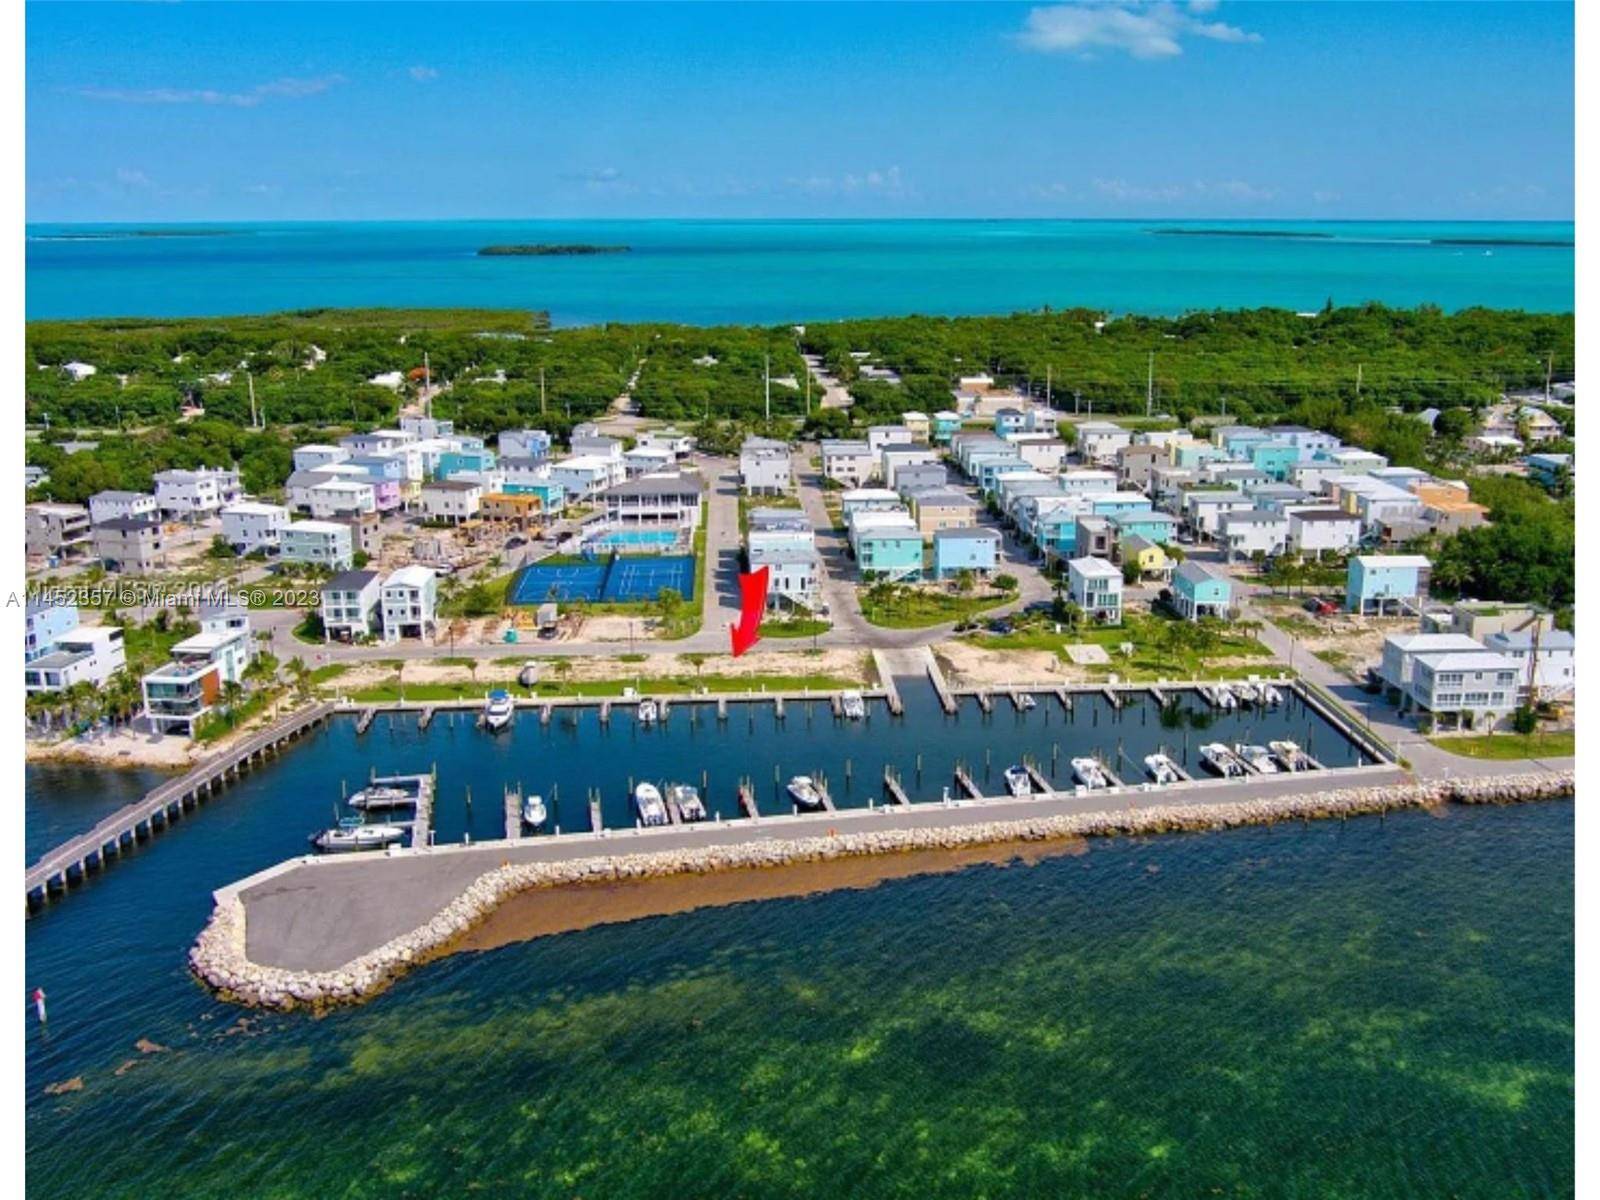 Lot 124. Your slice of the Florida Keys life is here and it's situated in Key Largo's newest luxury community, the Key Largo Ocean Resort.